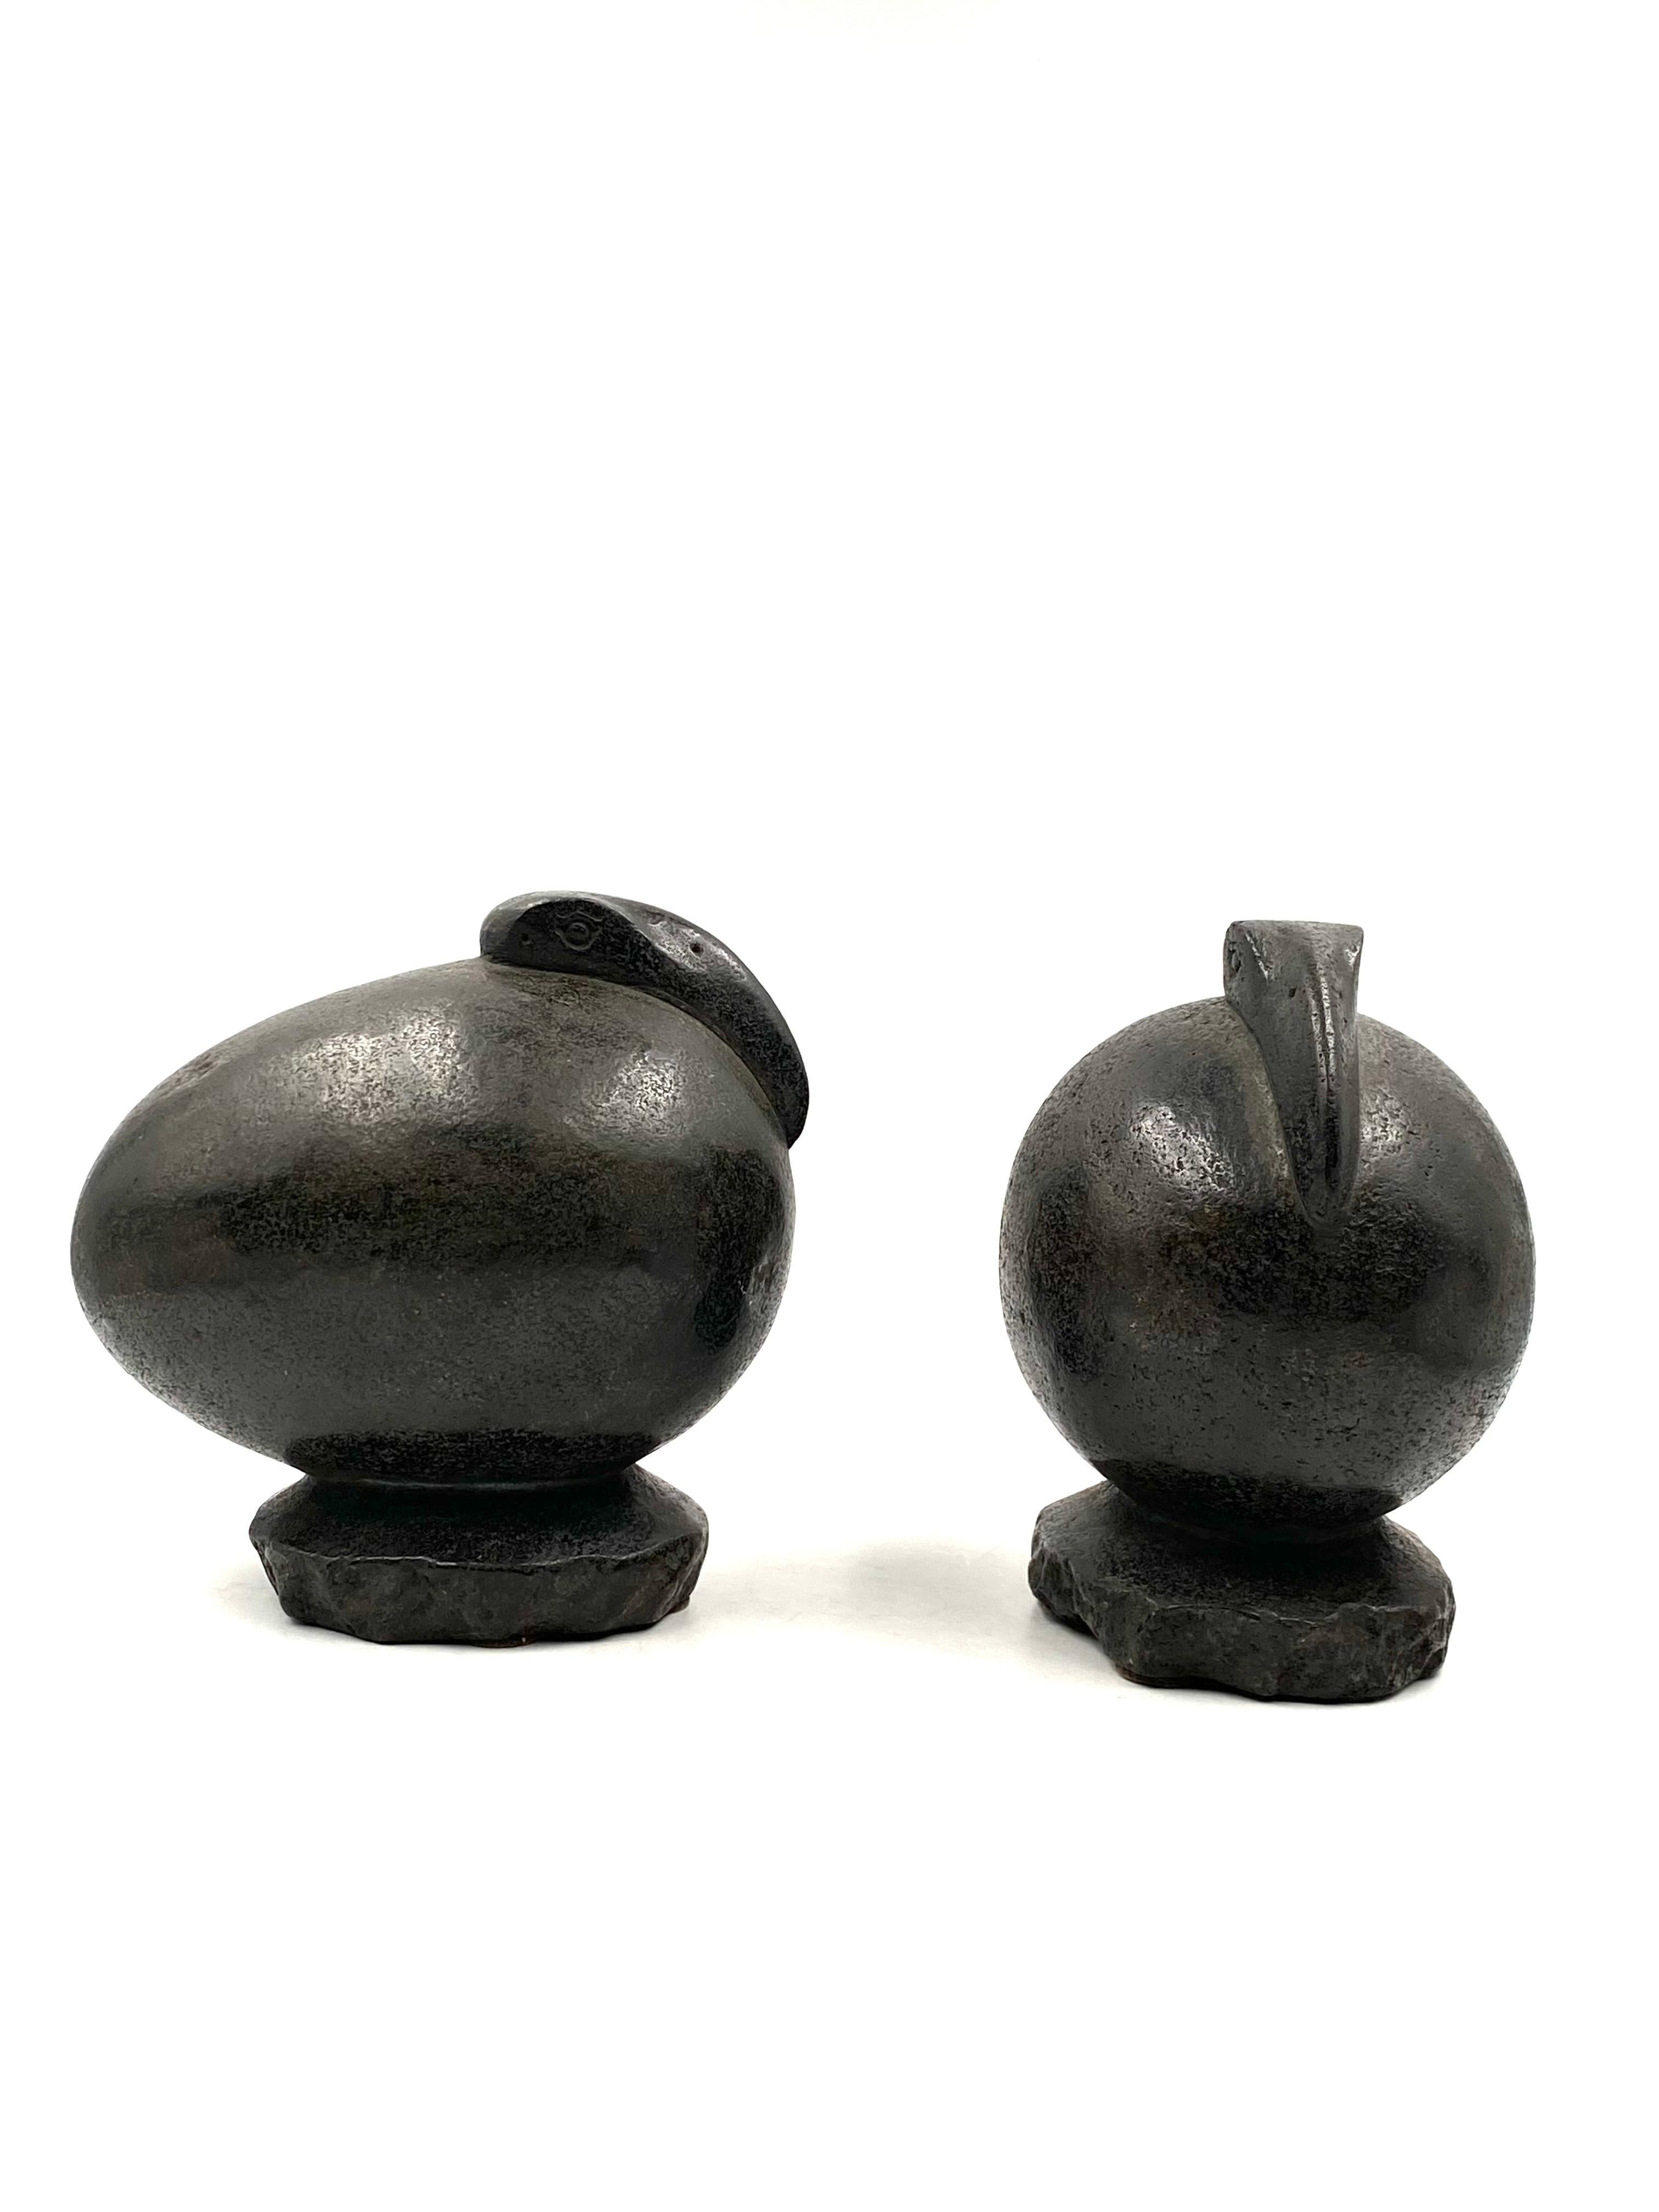 Ibis Birds, Pair of Basalt Ovoid Sculptures, France Early 20th Century 6